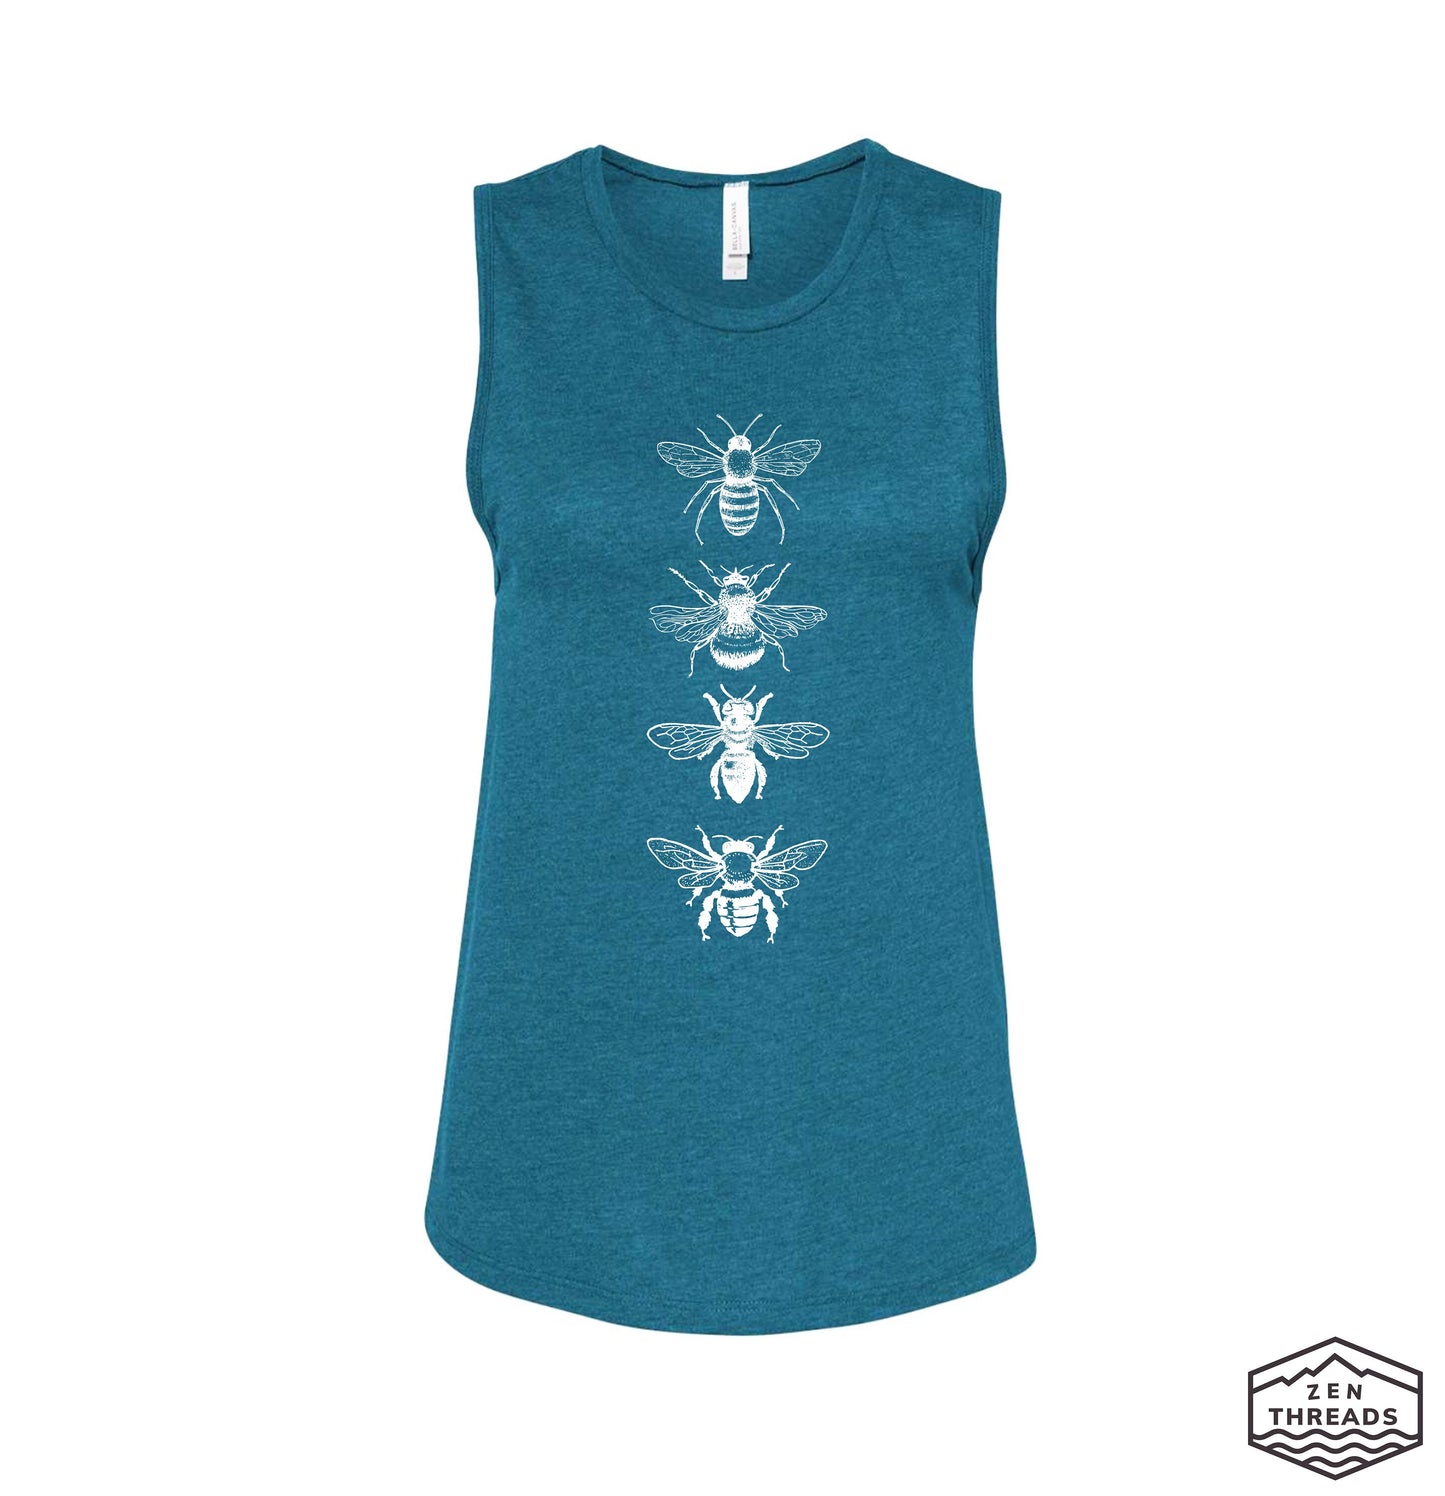 Womens BEES Muscle Tank workout fitness tee Insect hornet honey Nature Lover beekeeper t-shirt apiarist apiary honey insect honeybee